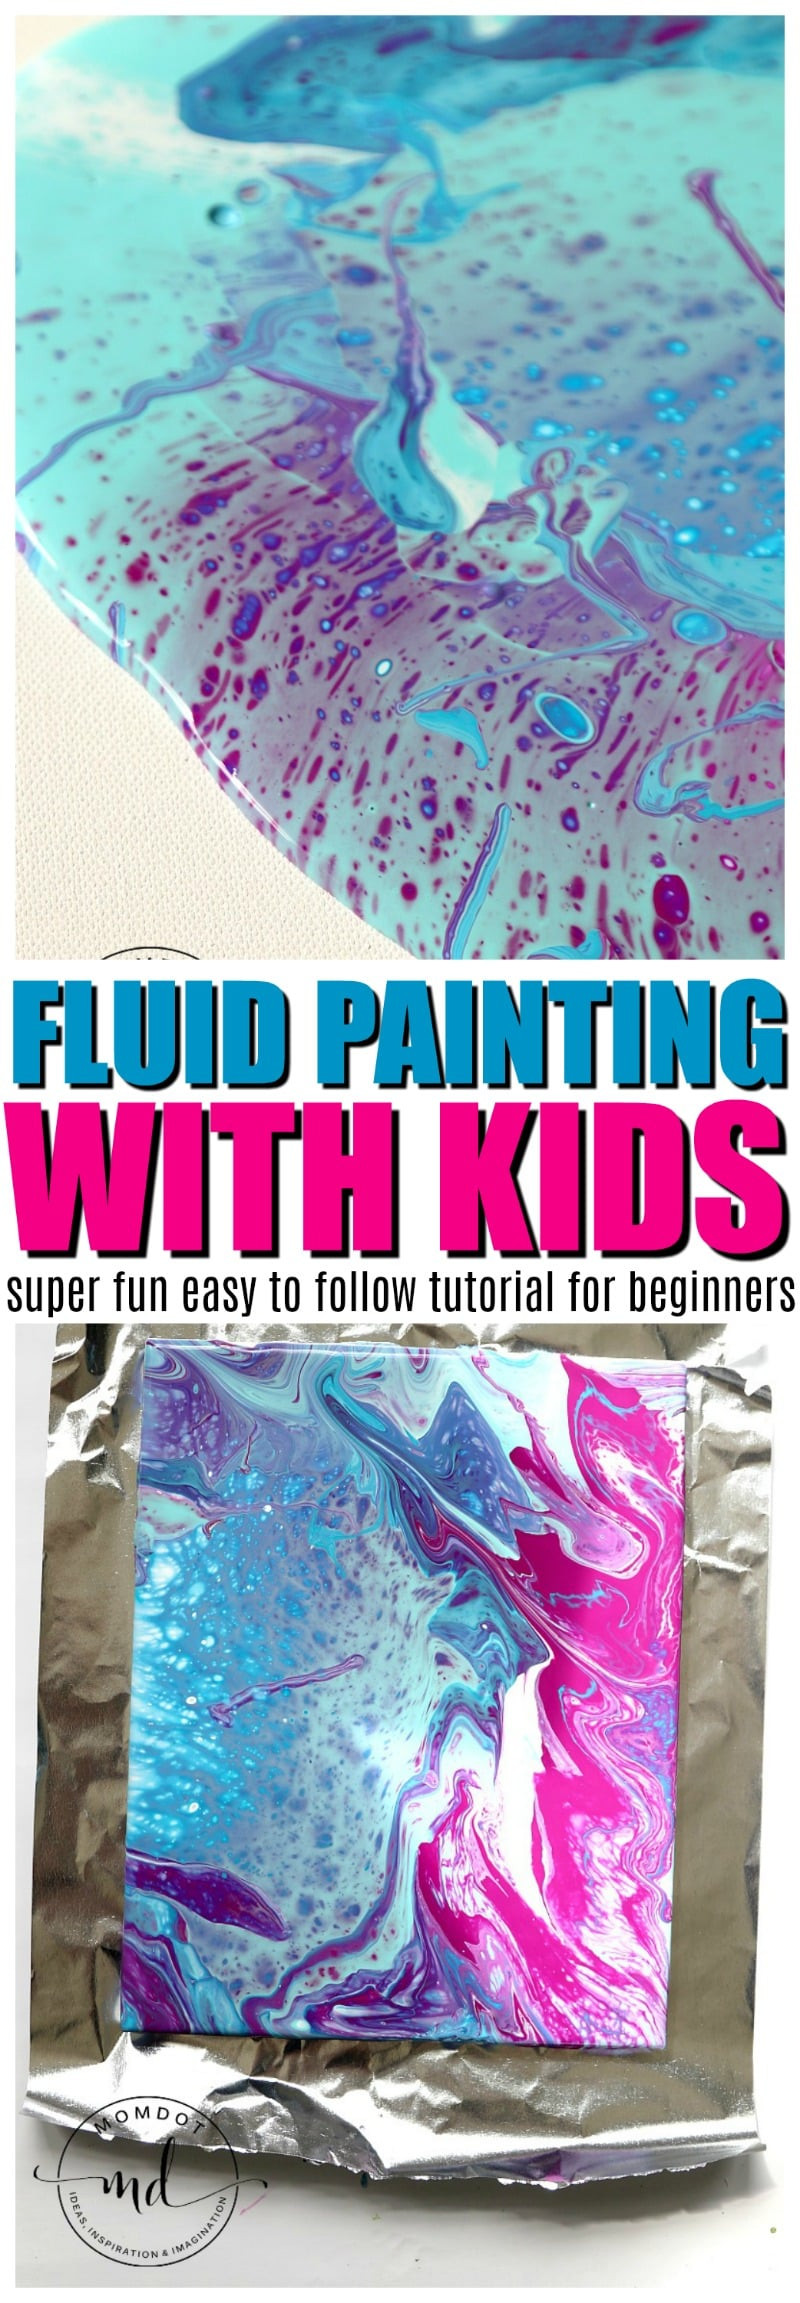 Kids Painting Tutorial
 How to Fluid Paint with Kids